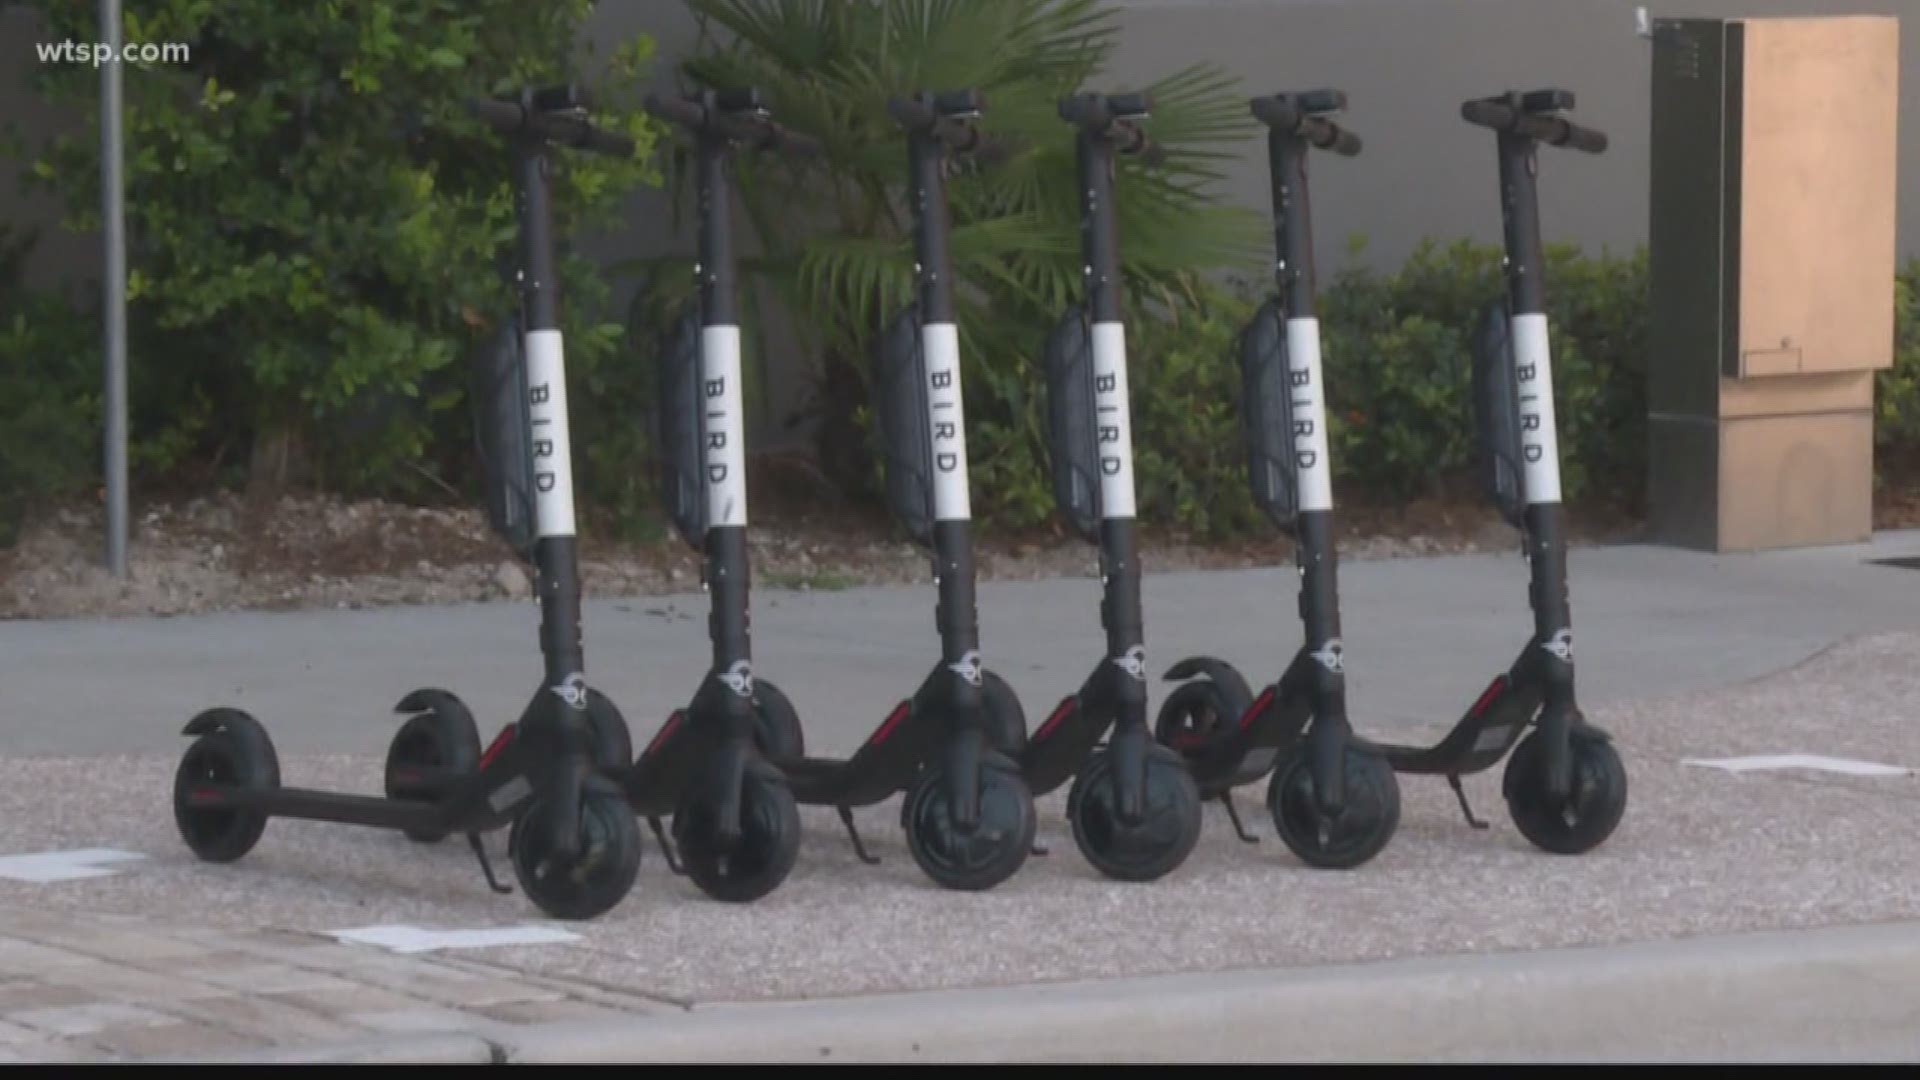 Gov. Ron DeSantis signed a bill Tuesday legalizing electric scooters in Florida.

House Bill 453 takes effect immediately. It allows e-scooter companies to operate anywhere under the regulation of Florida counties, cities and towns.

HB 453 sponsors are from the Tampa Bay area. State Rep. Jackie Toledo, D-Tampa, sponsored the House version. State Sen. Jeff Brandes, R-St. Petersburg, sponsored the Senate version.